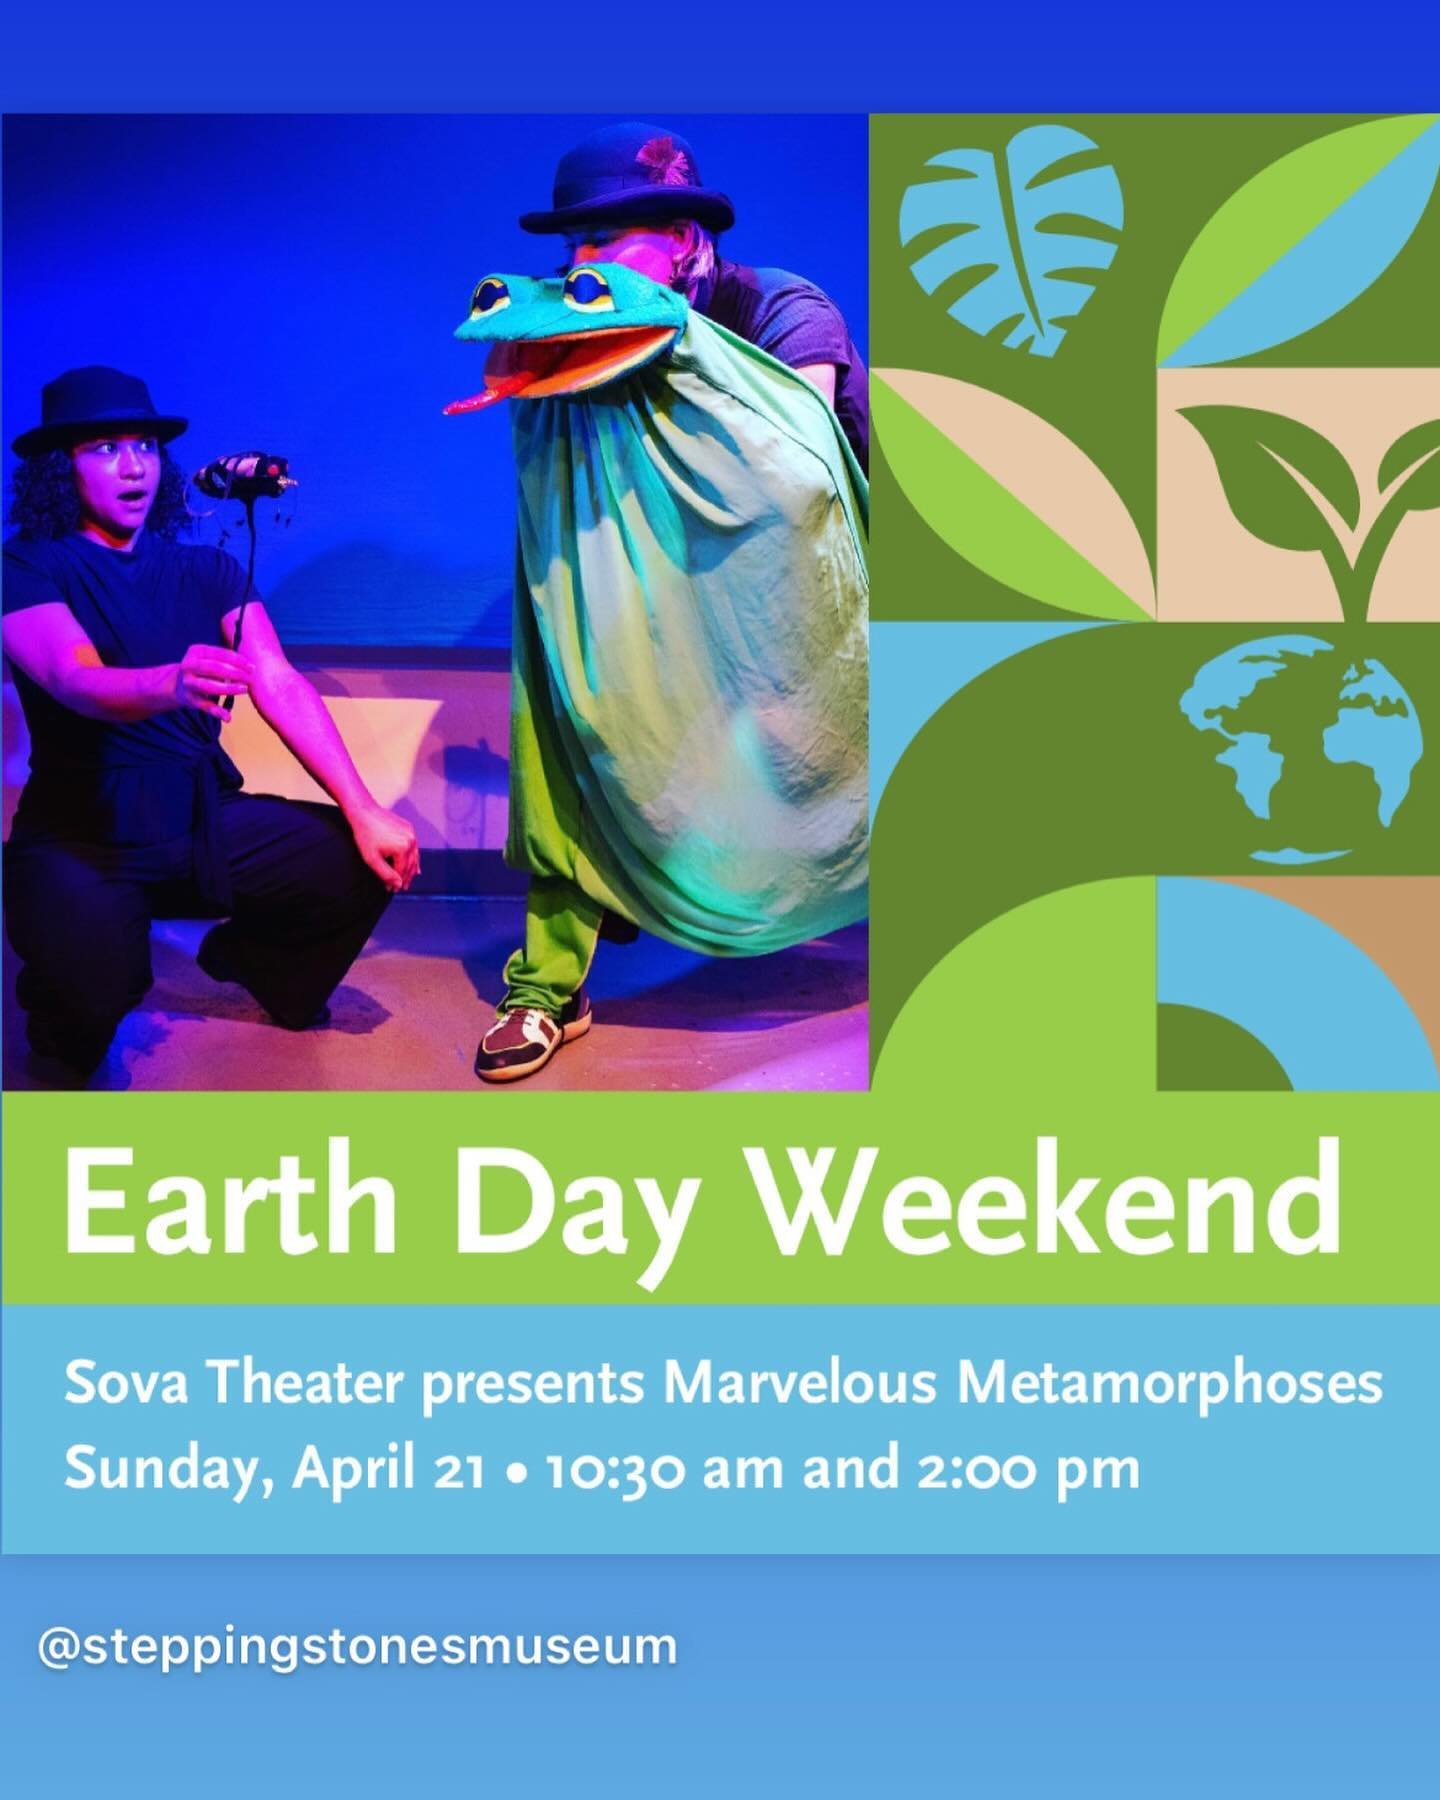 We are performing &ldquo;Marvelous Metamorphoses&rdquo; Sunday April 21 at 10:30am &amp; 2pm @steppingstonesmuseum for Children to celebrate Earth Day! 

Photo Credit: Richard Termine @richardtermine